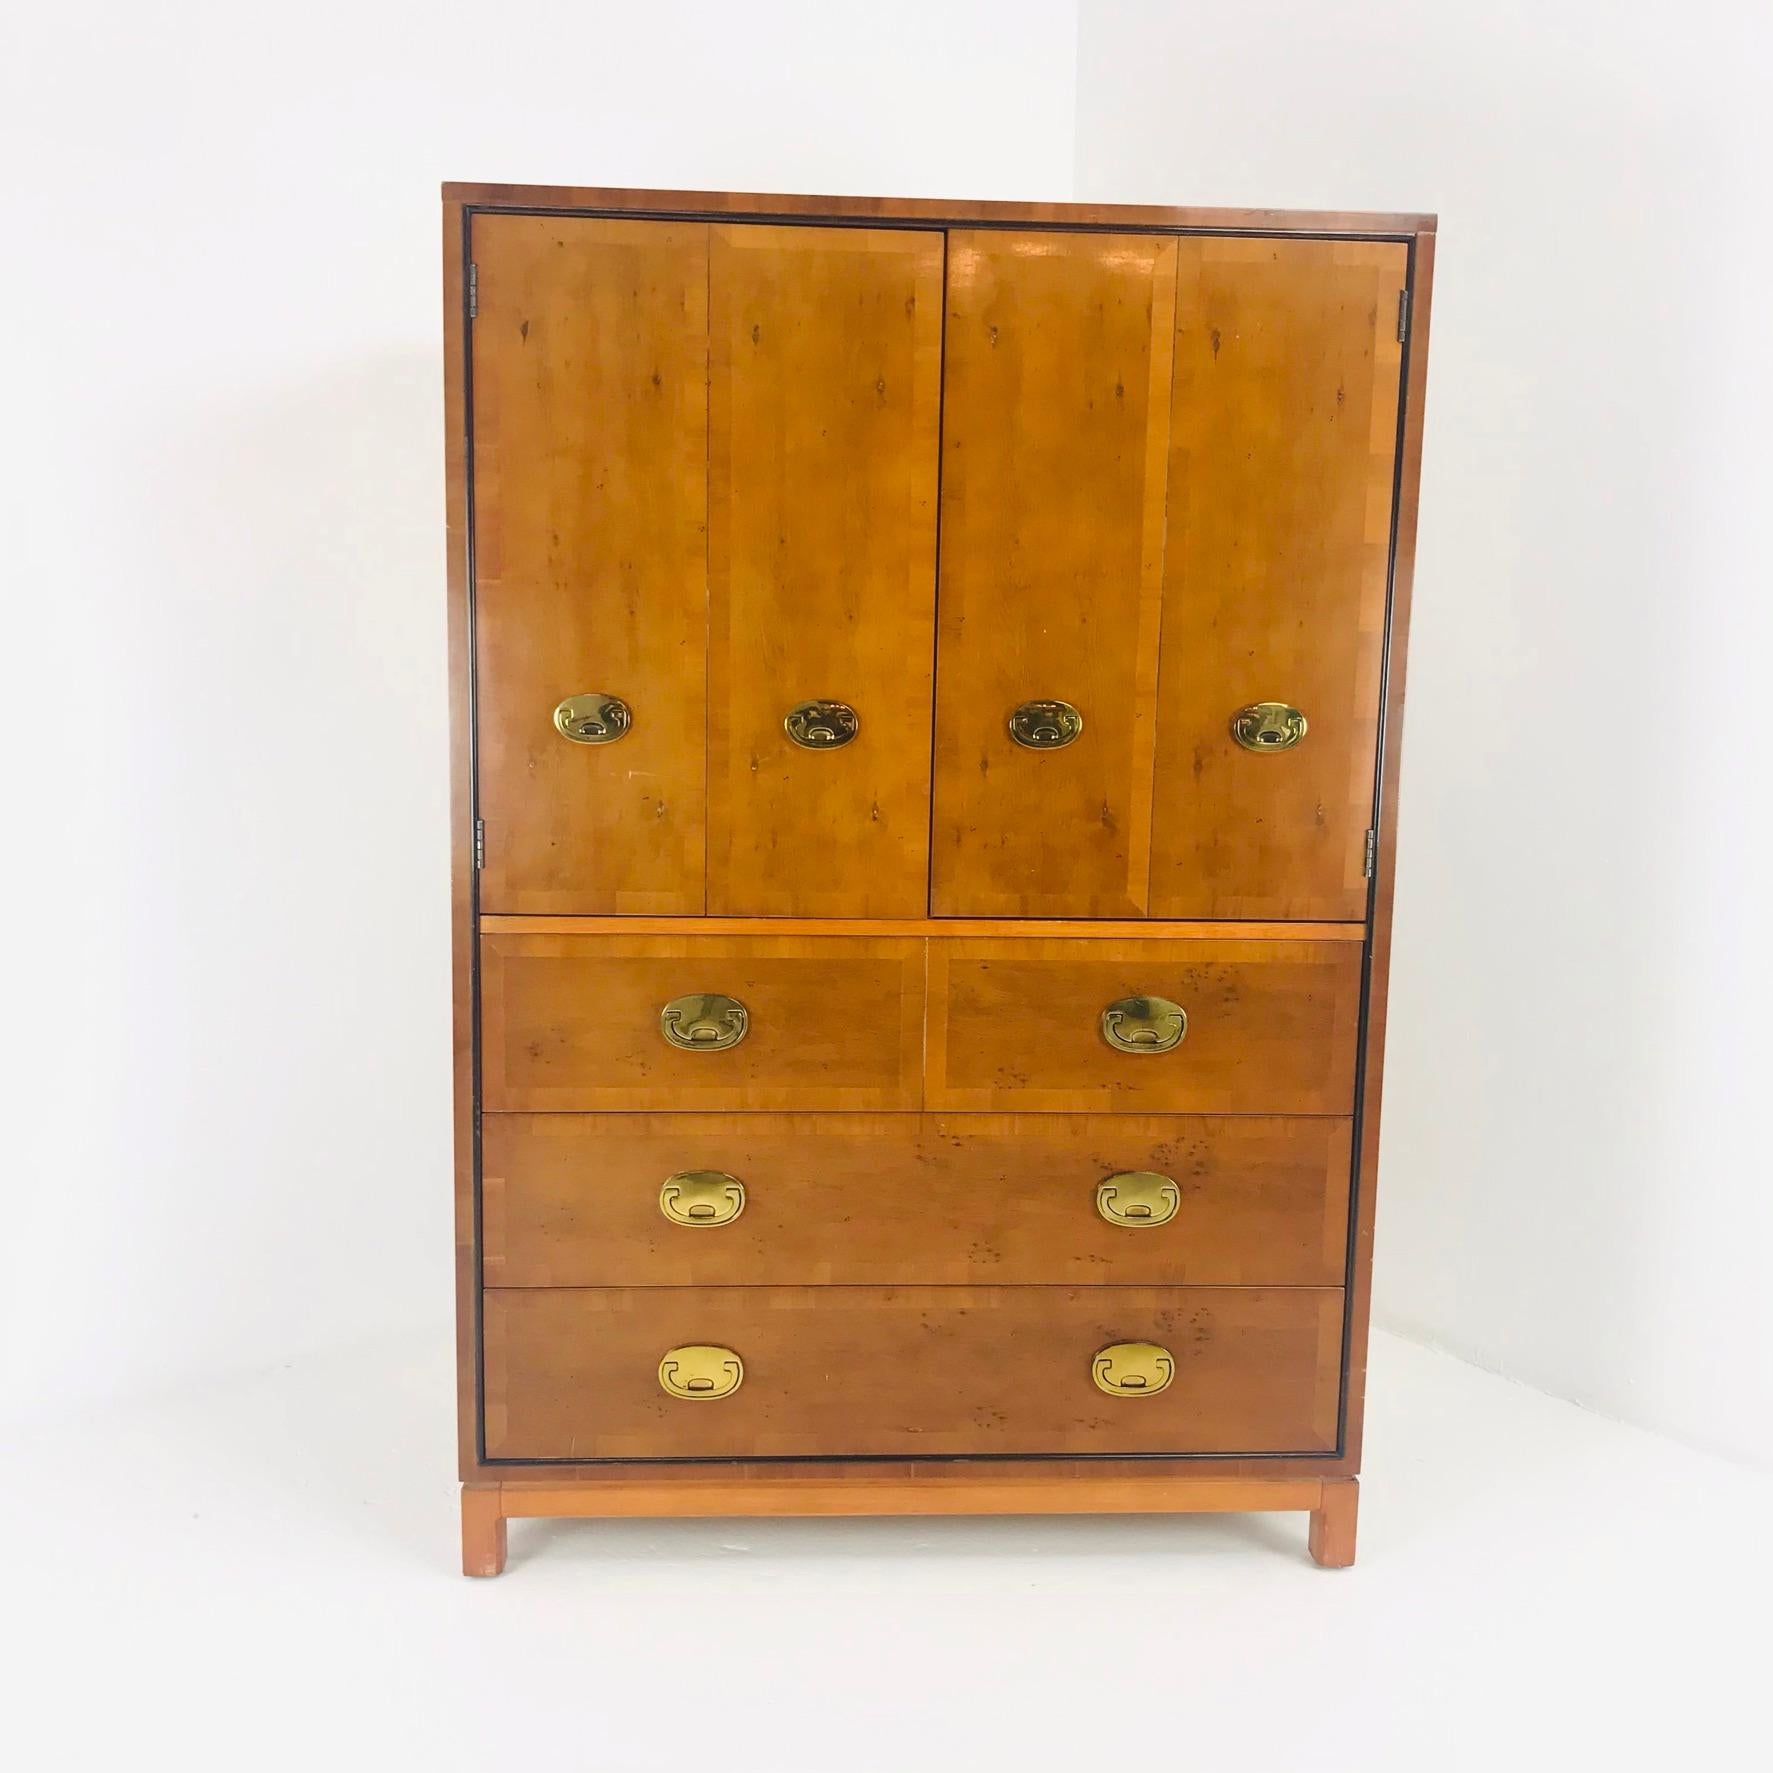 1970s hickory high gentleman's chest/armoire. Good structural condition with some scratches and wear due to age and use.